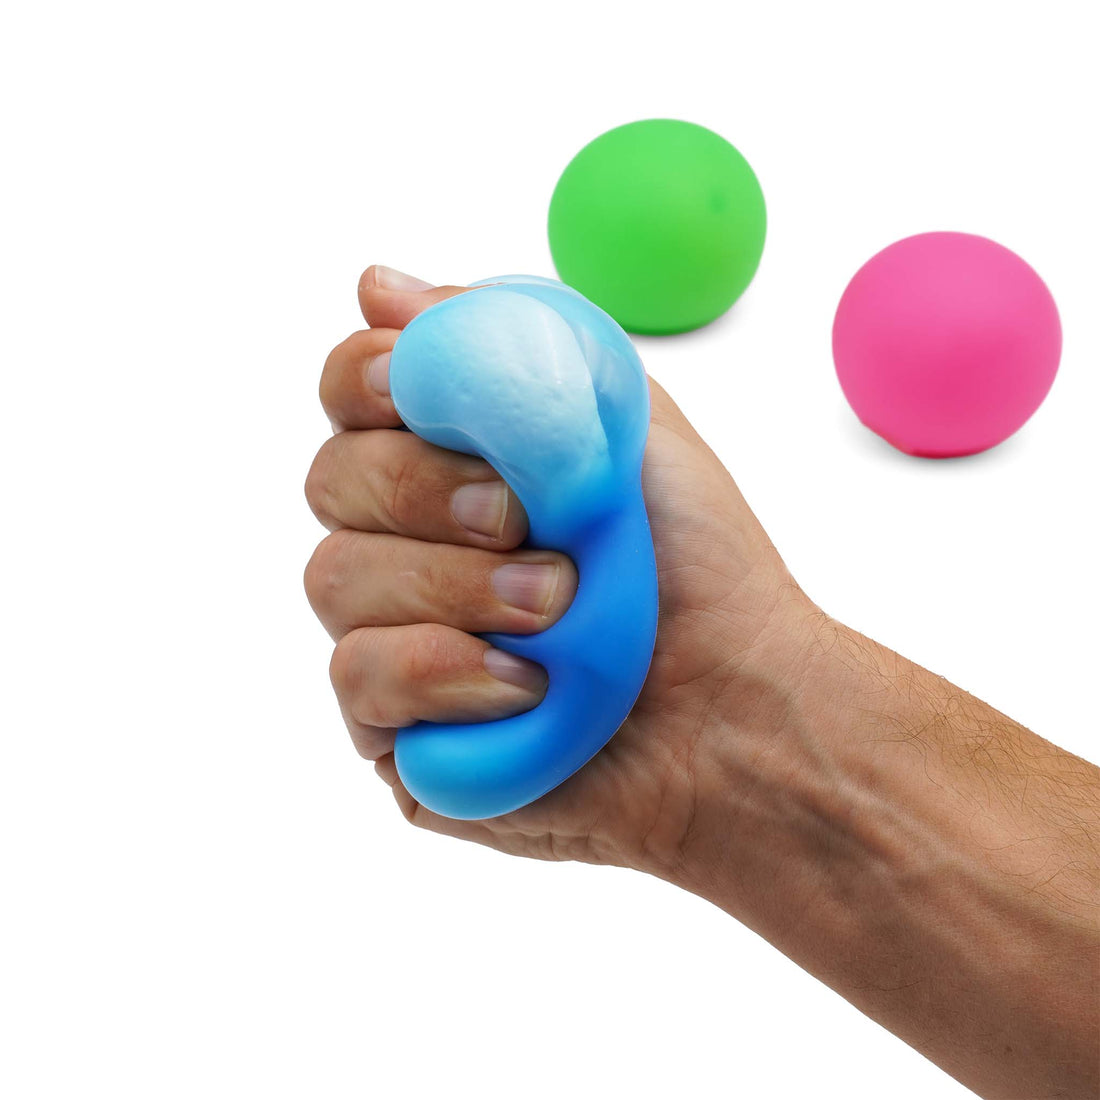 blue sensory squishy ball squished in hand with green and pink sensory squishy balls in the background